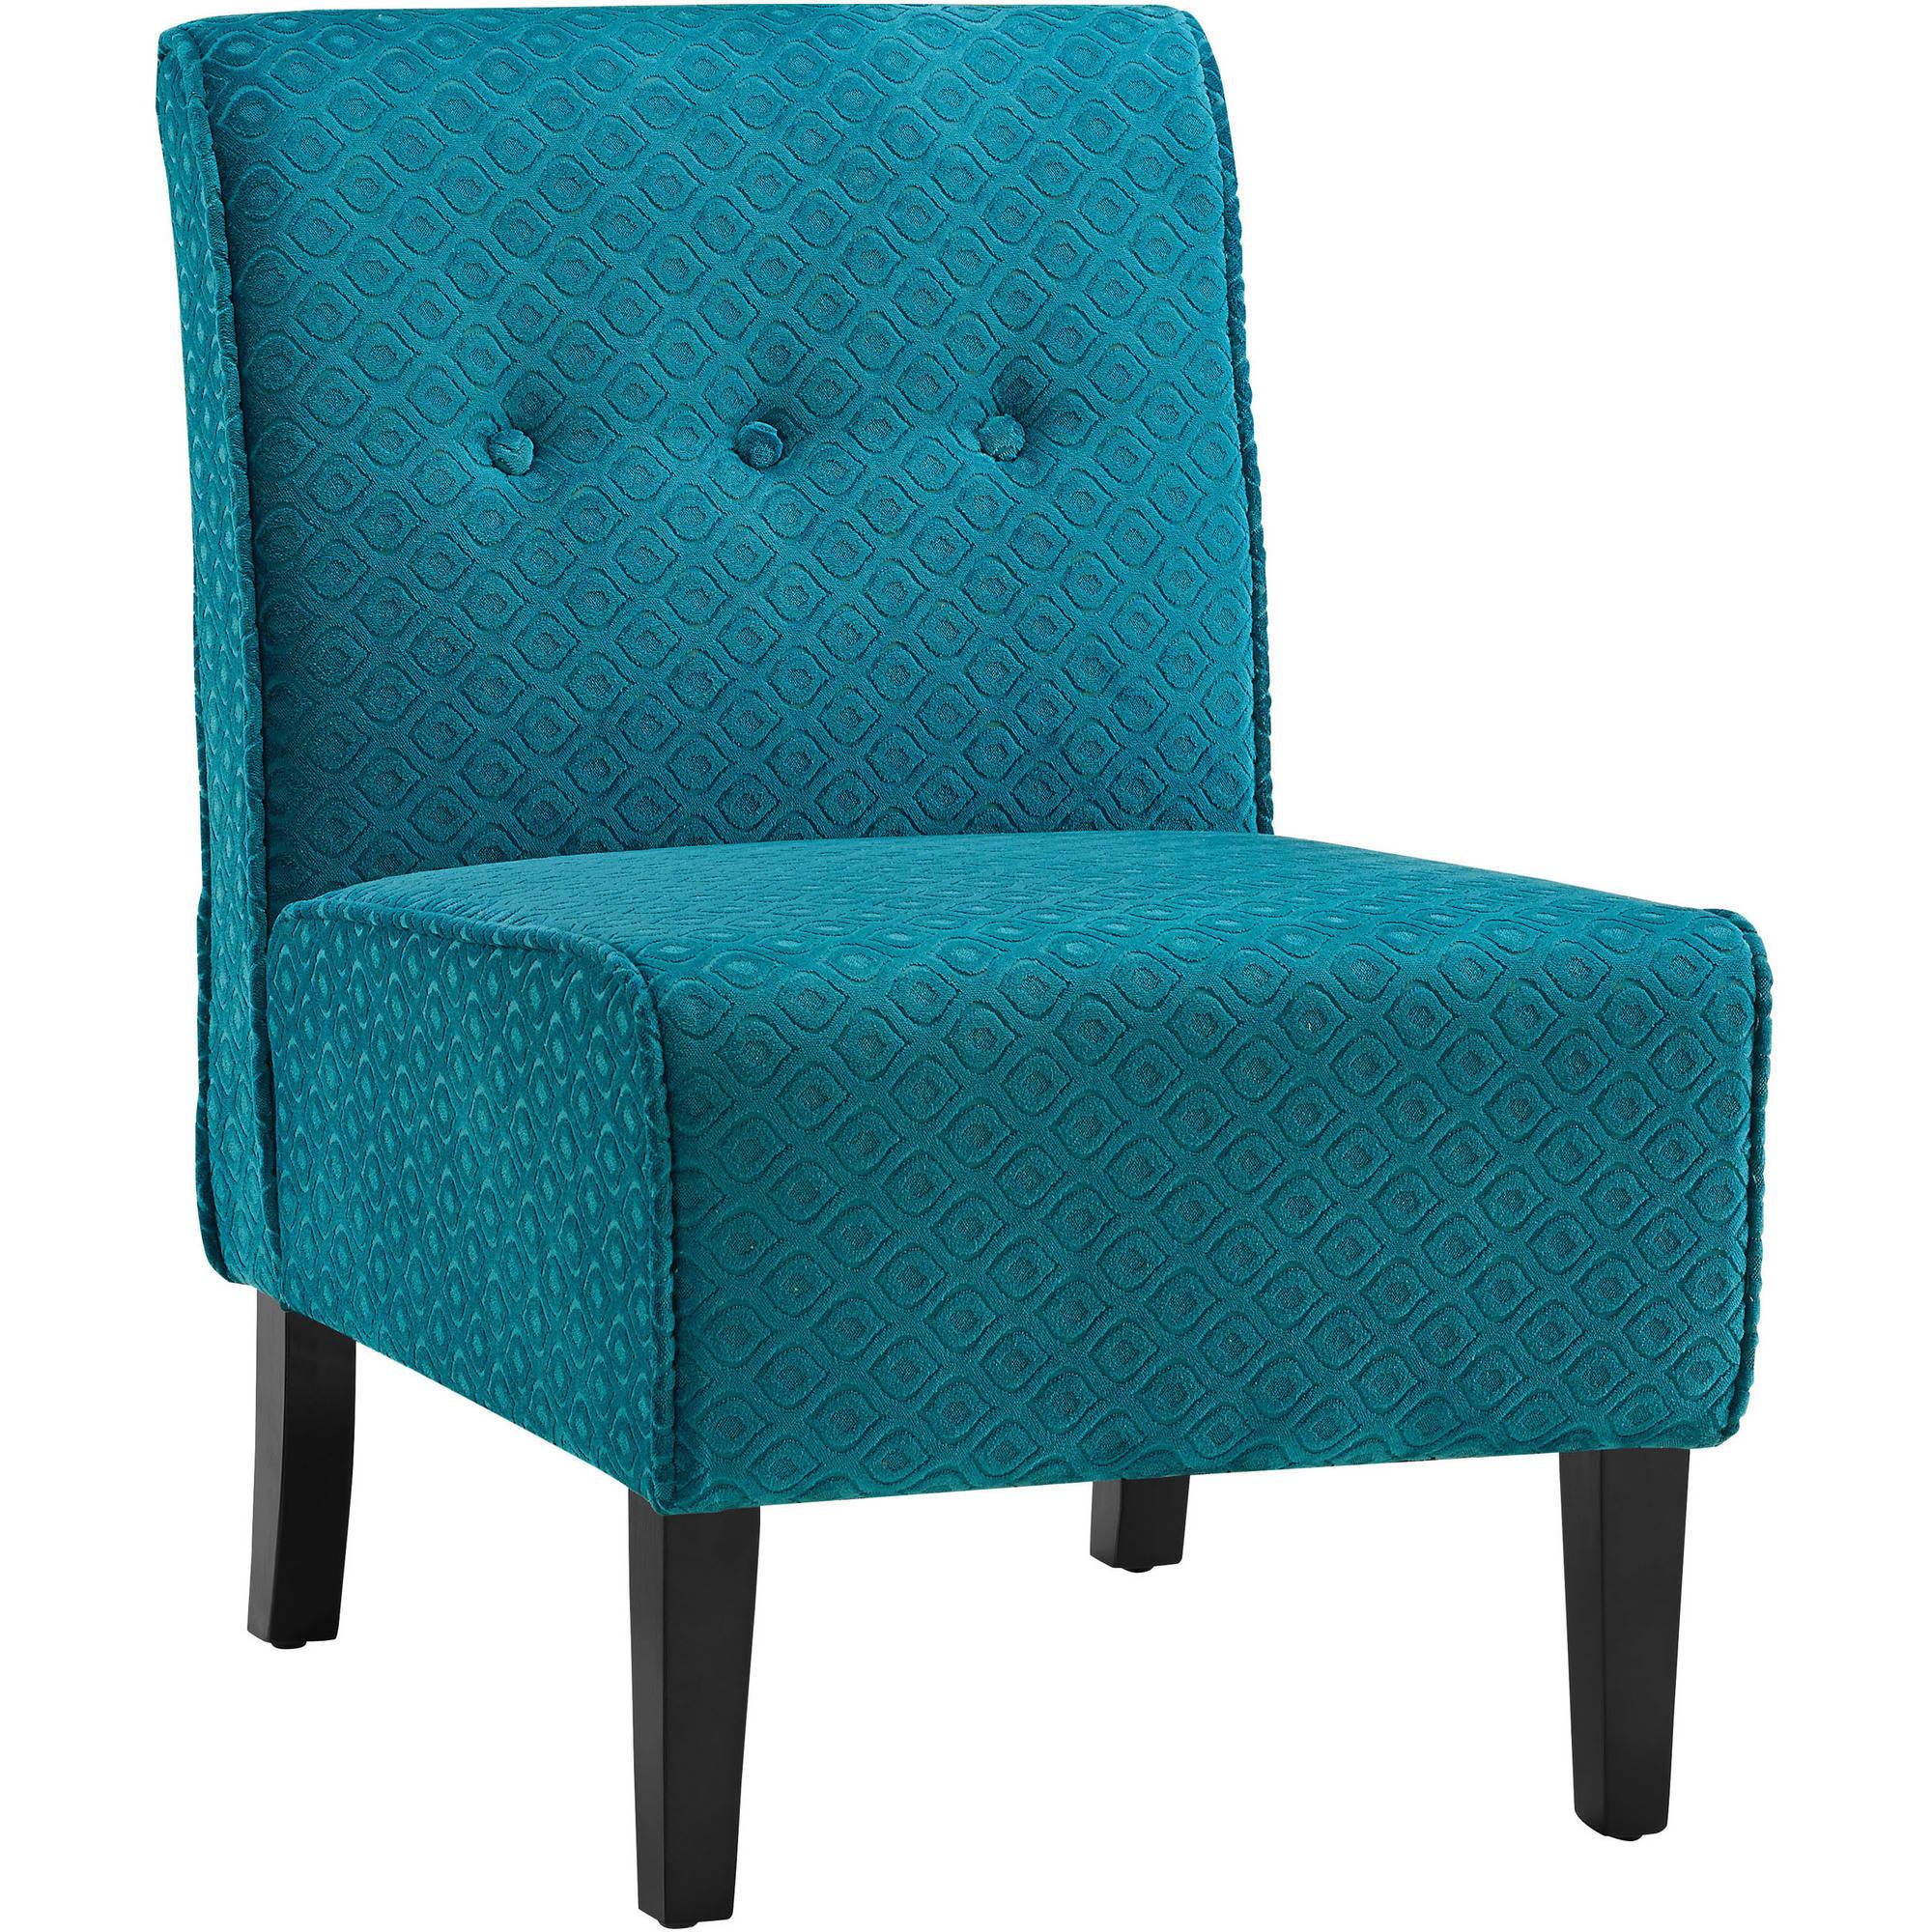 Coco Teal Blue Accent Chair